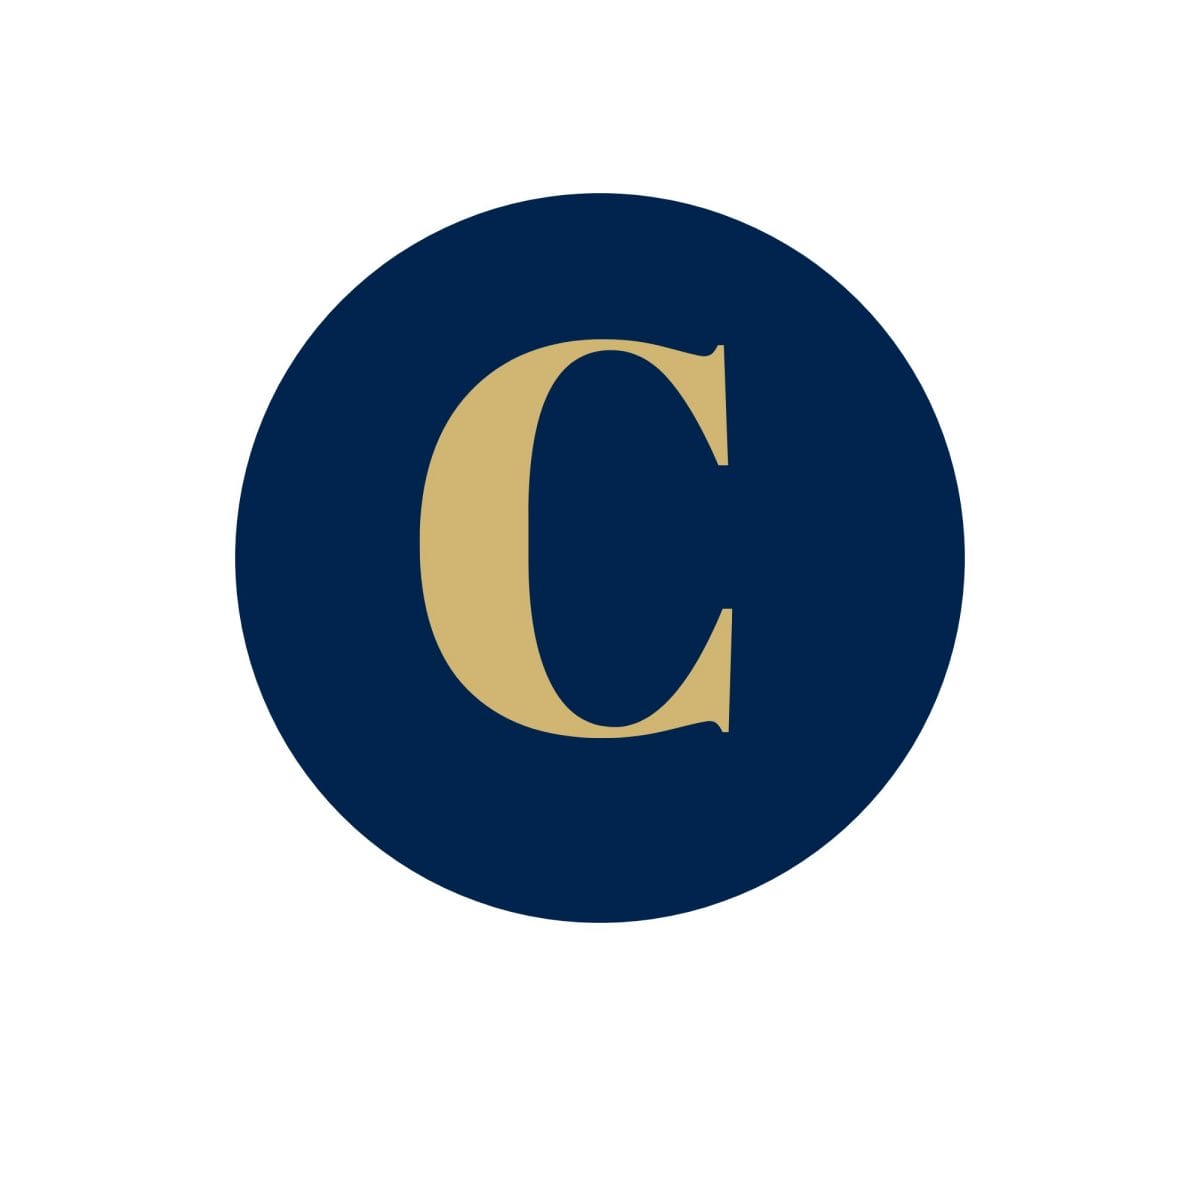 Letter 'c' in a navy circle (icon)